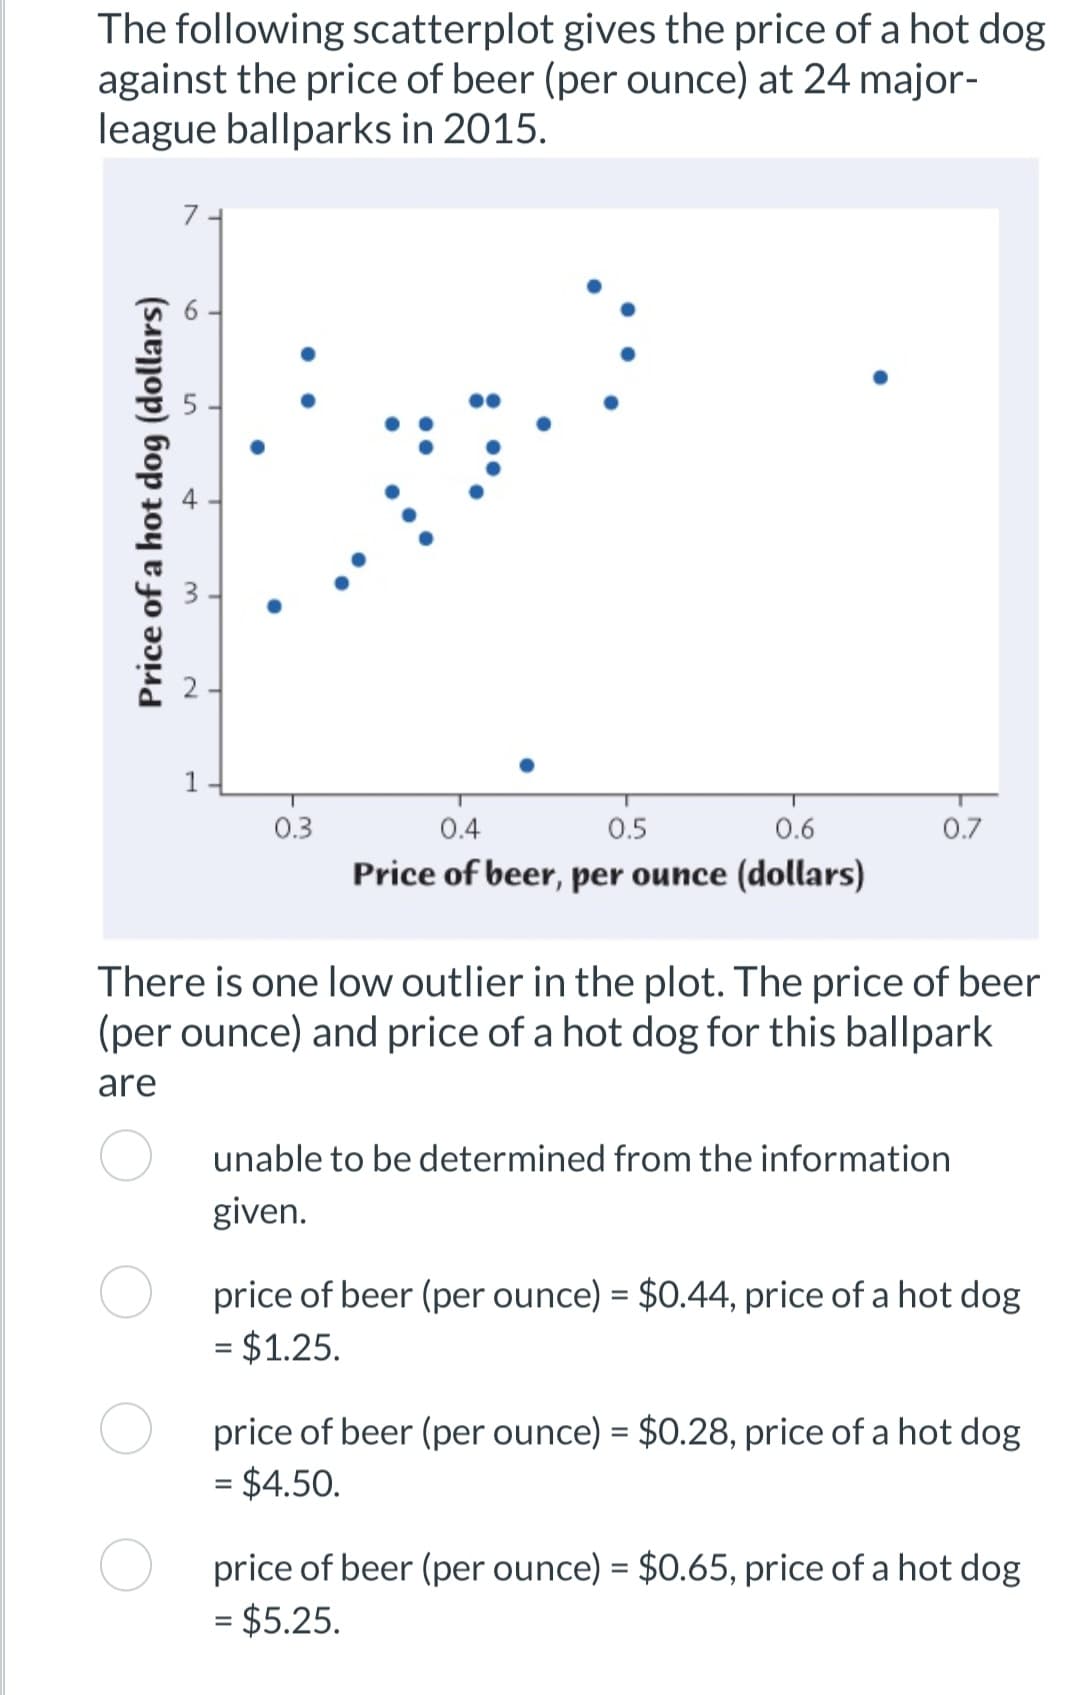 The following scatterplot gives the price of a hot dog
against the price of beer (per ounce) at 24 major-
league ballparks in 2015.
0.3
0.4
0.5
0.6
0.7
Price of beer, per ounce (dollars)
There is one low outlier in the plot. The price of beer
(per ounce) and price of a hot dog for this ballpark
are
unable to be determined from the information
given.
price of beer (per ounce) = $0.44, price of a hot dog
= $1.25.
price of beer (per ounce) = $0.28, price of a hot dog
= $4.50.
price of beer (per ounce) = $0.65, price of a hot dog
= $5.25.
9
Price of a hot dog (dollars)
LO
+
m
2
T